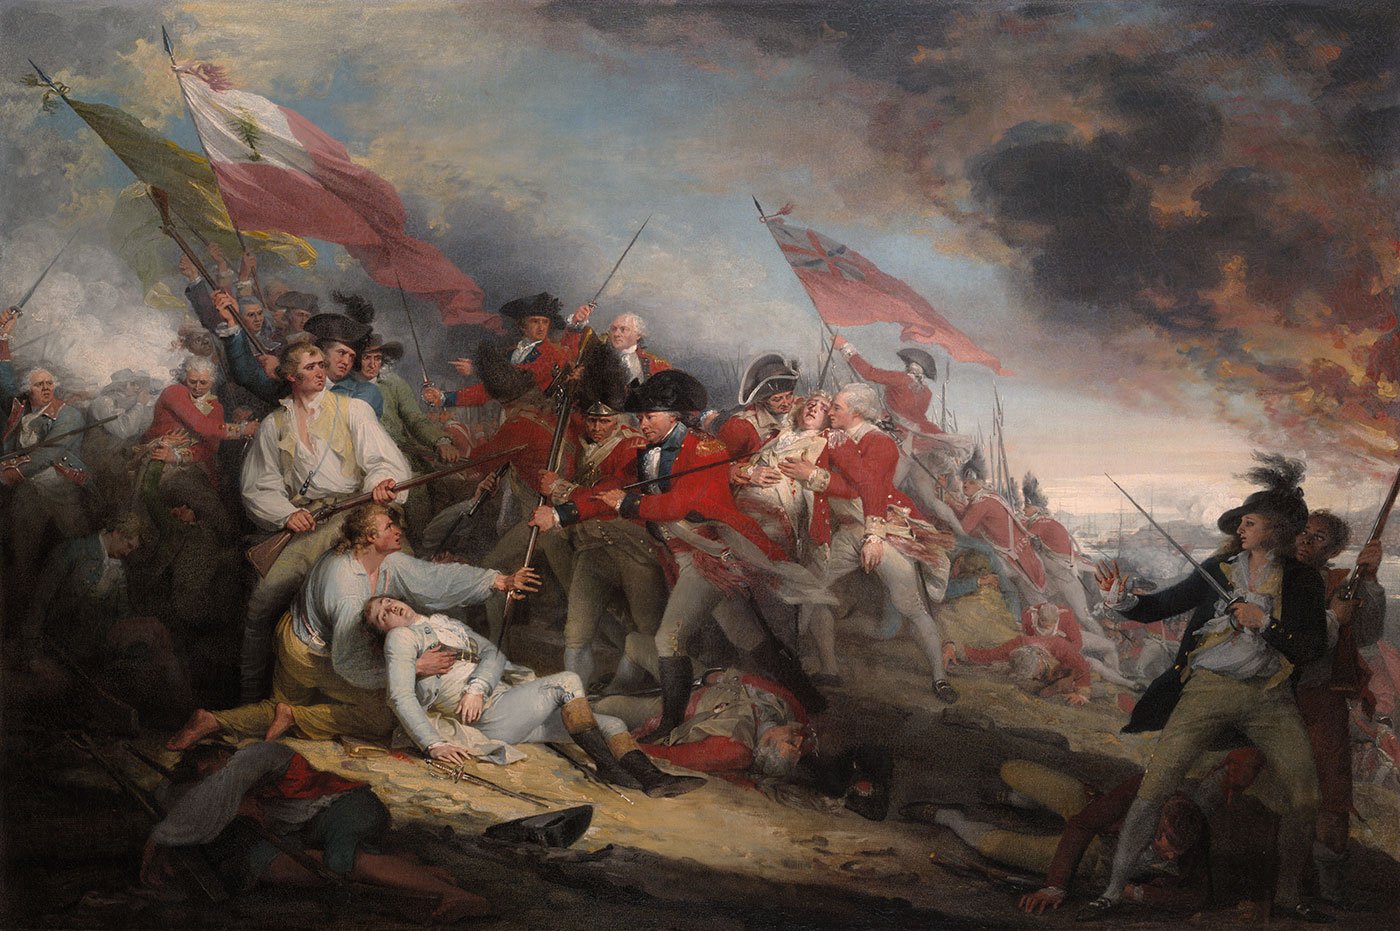 The Battle of Bunker Hill painting by John Trumbull